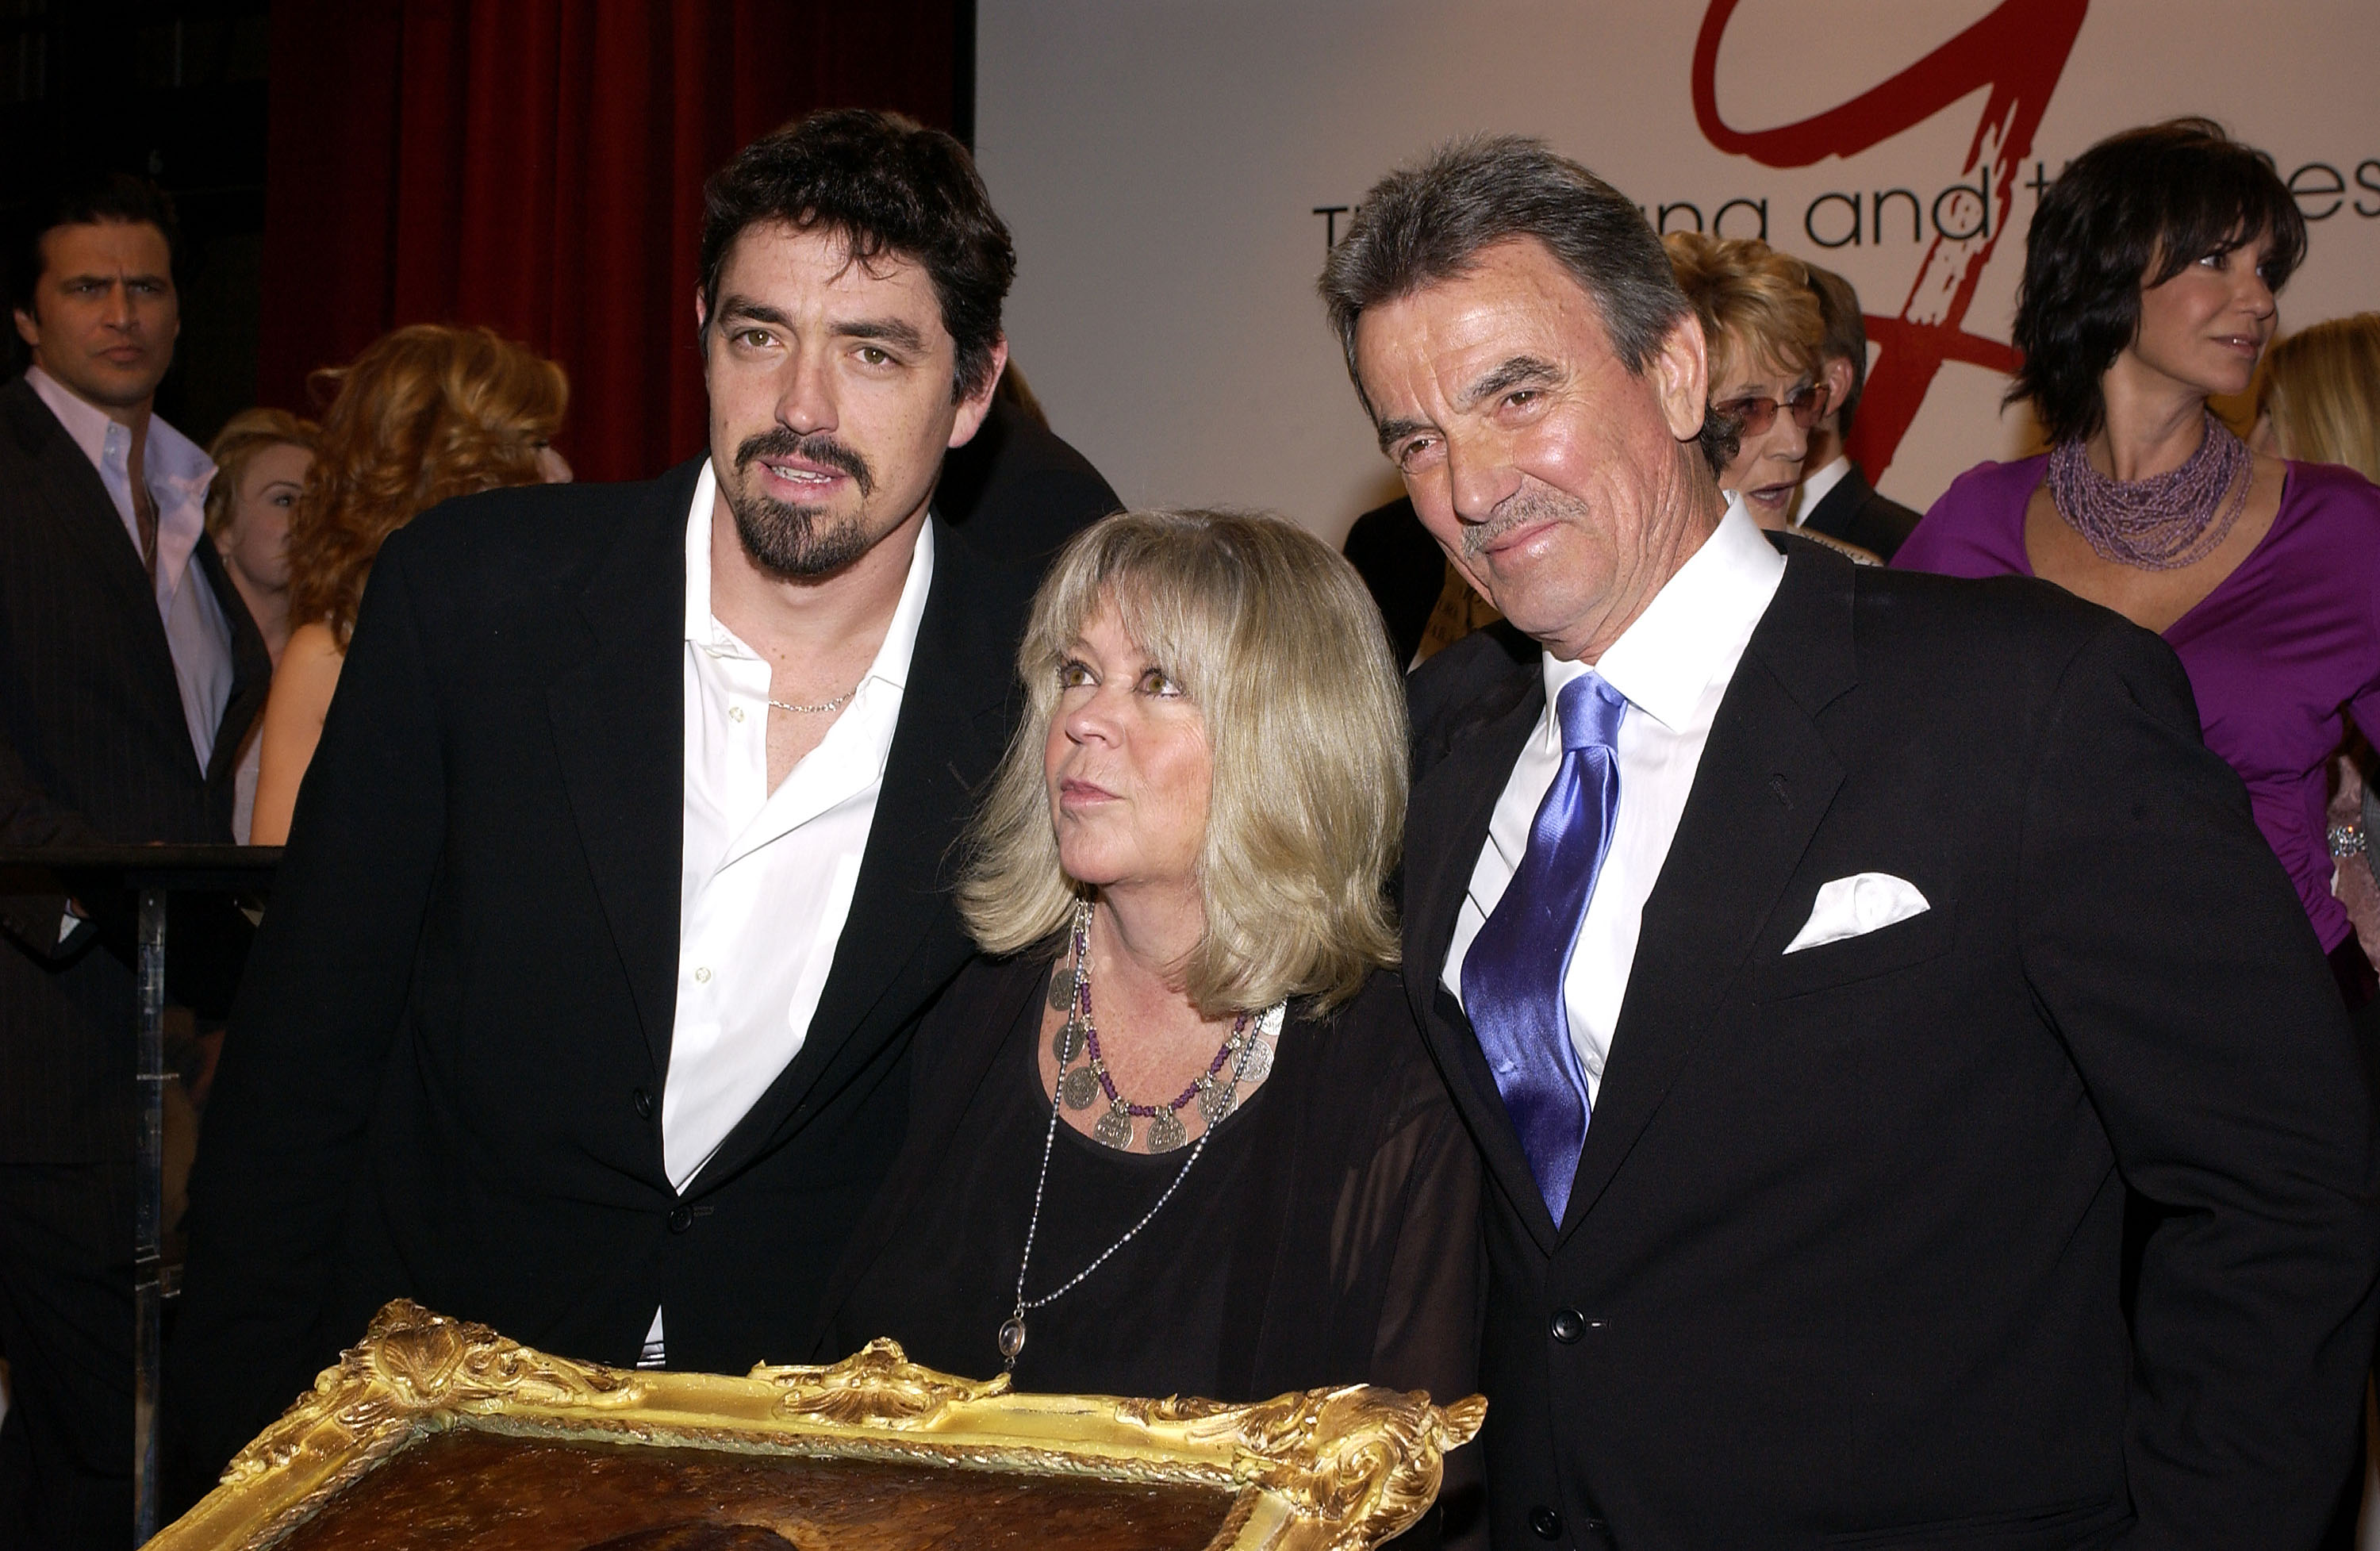 Christian Braeden, Dale Russell Gudegast, and Eric Braeden celebrate the actor's 25th anniversary playing the character Victor Newman on "The Young and The Restless" on February 1, 2005, in Los Angeles, California | Source: Getty Images